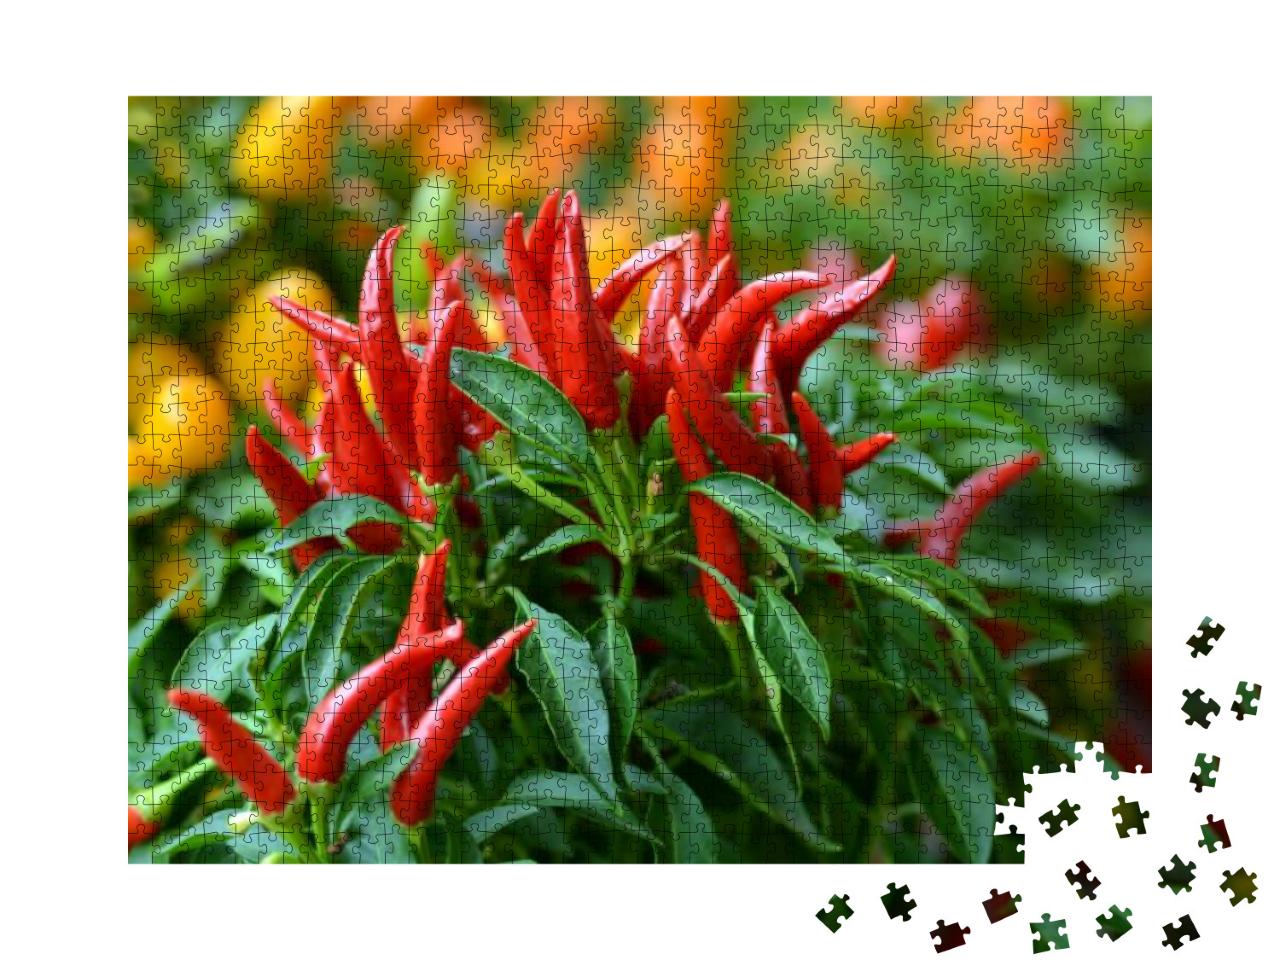 Birds Eye Chili Grow in the Garden. No People. Copy Space... Jigsaw Puzzle with 1000 pieces